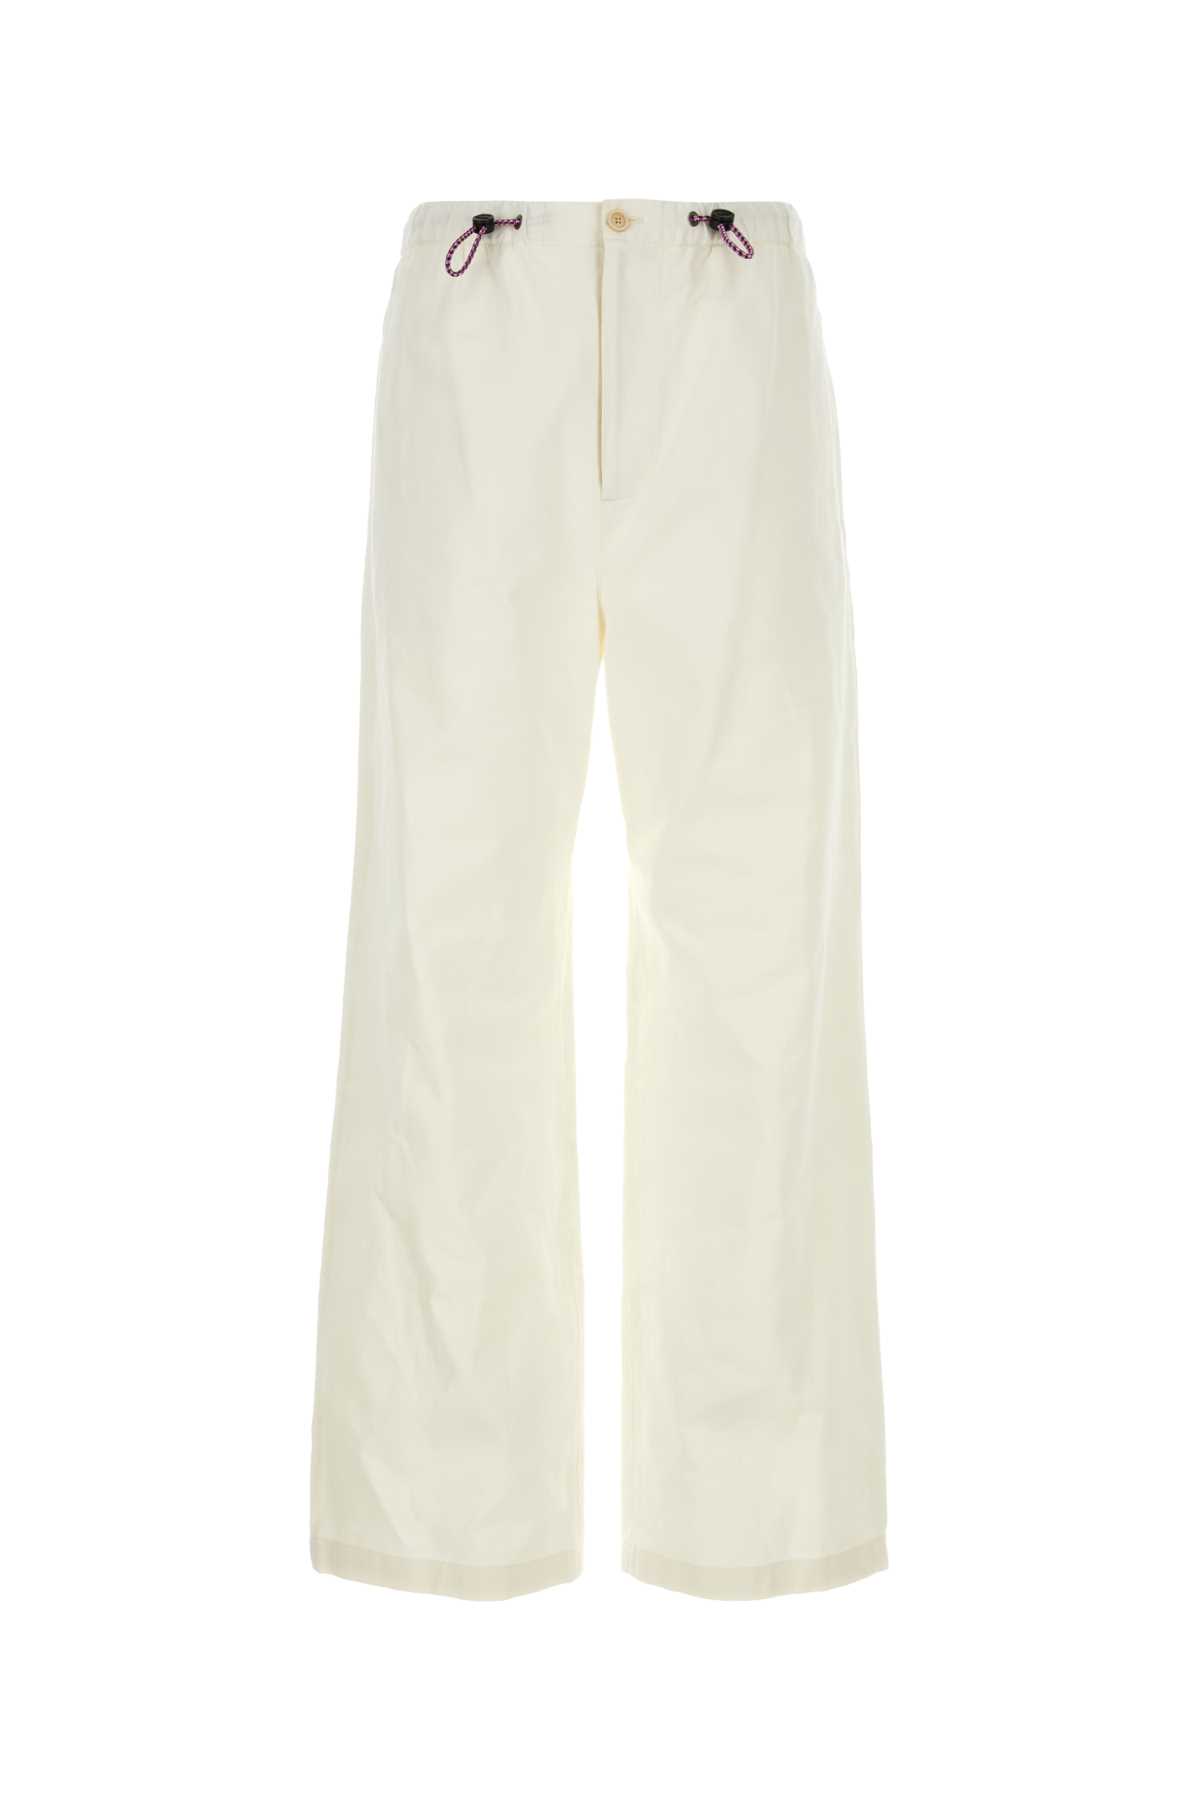 Gucci Ivory Drill Pant